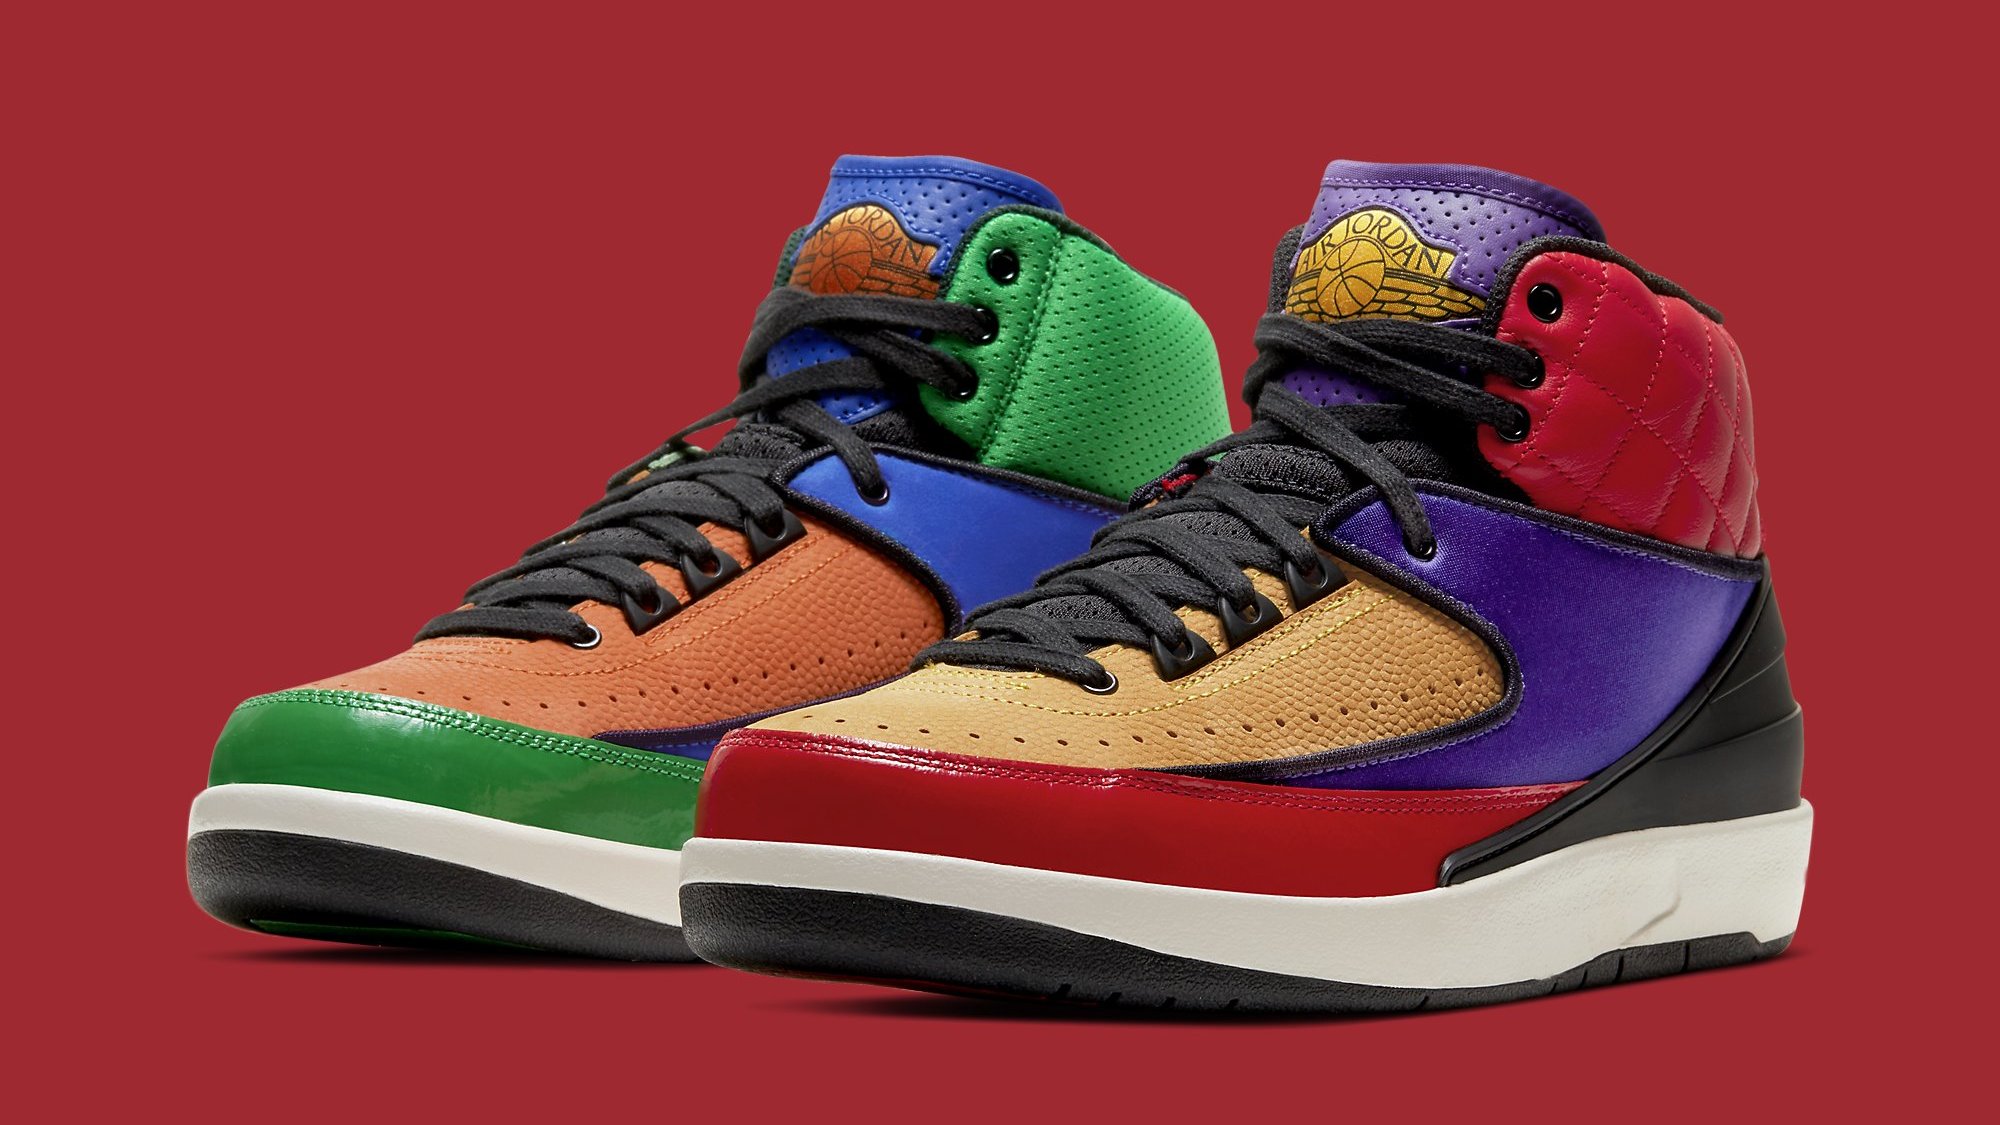 colorful jordans that just came out